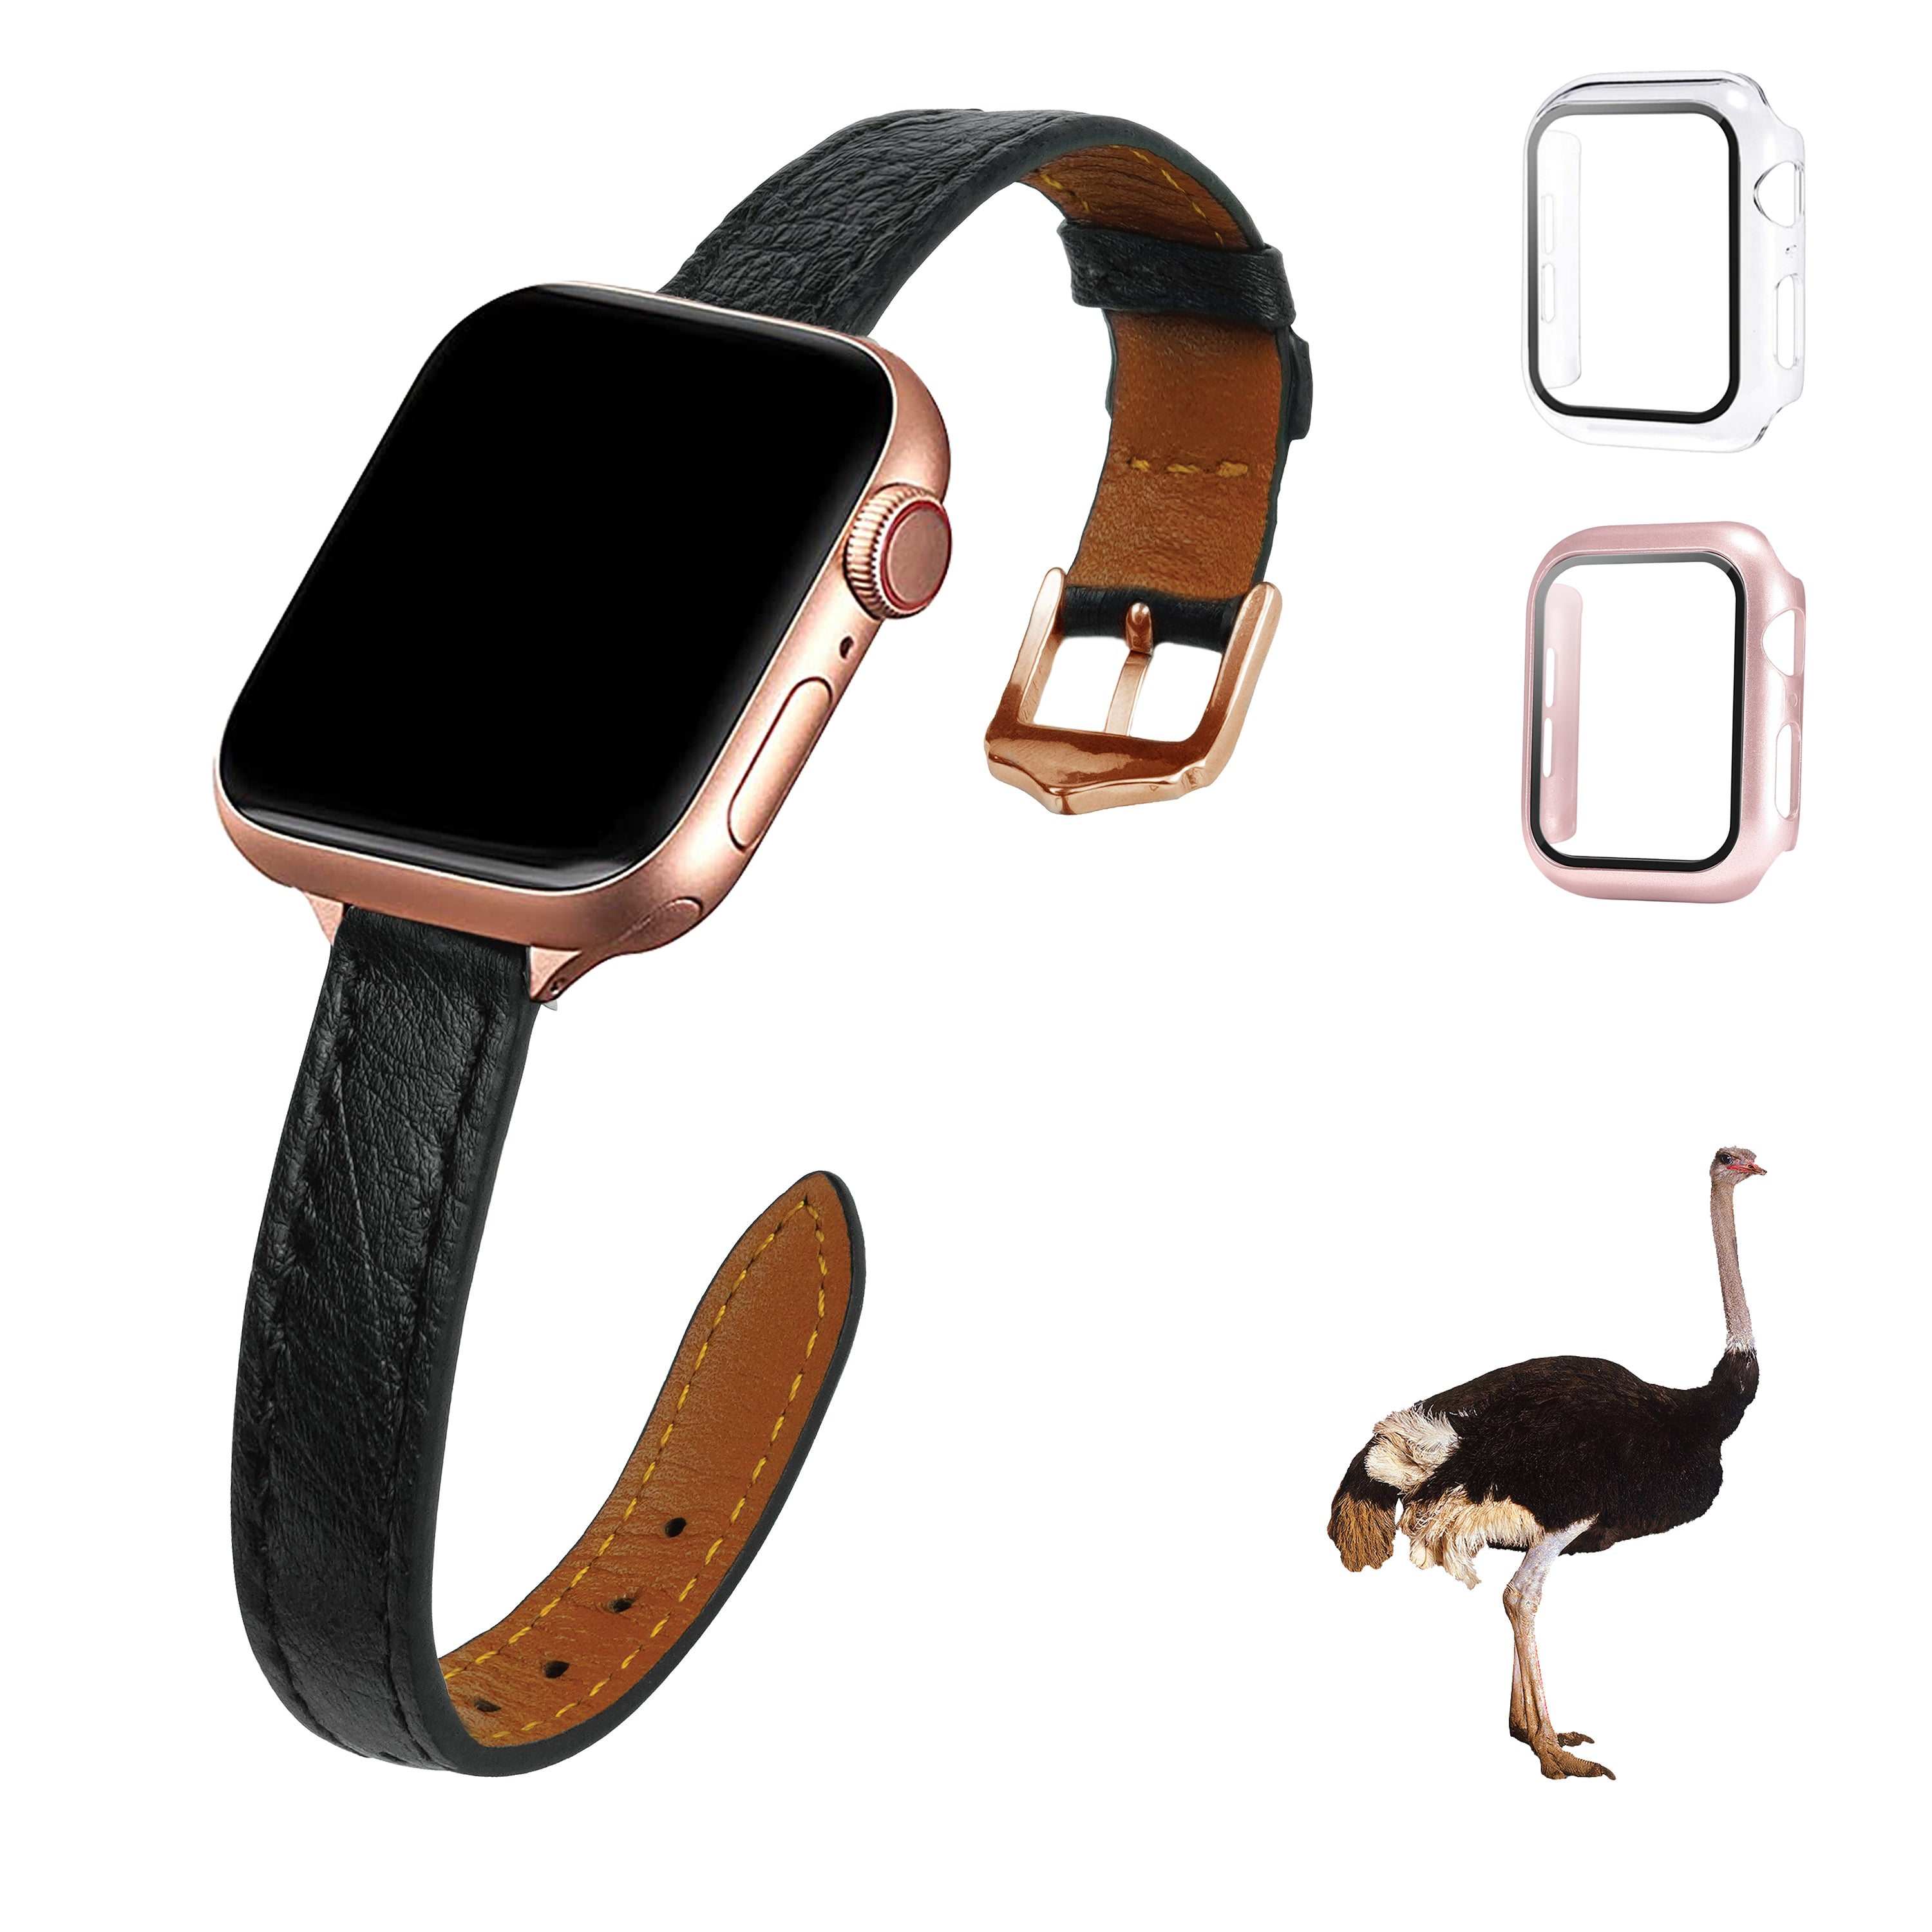 Black Flat Ostrich Leather Band Compatible Apple Watch Iwatch 38mm Screen Protector Case Gold Adapter Replacement Strap For Smartwatch Series 1 2 3 Leather Handmade AW-181G-W-38MM